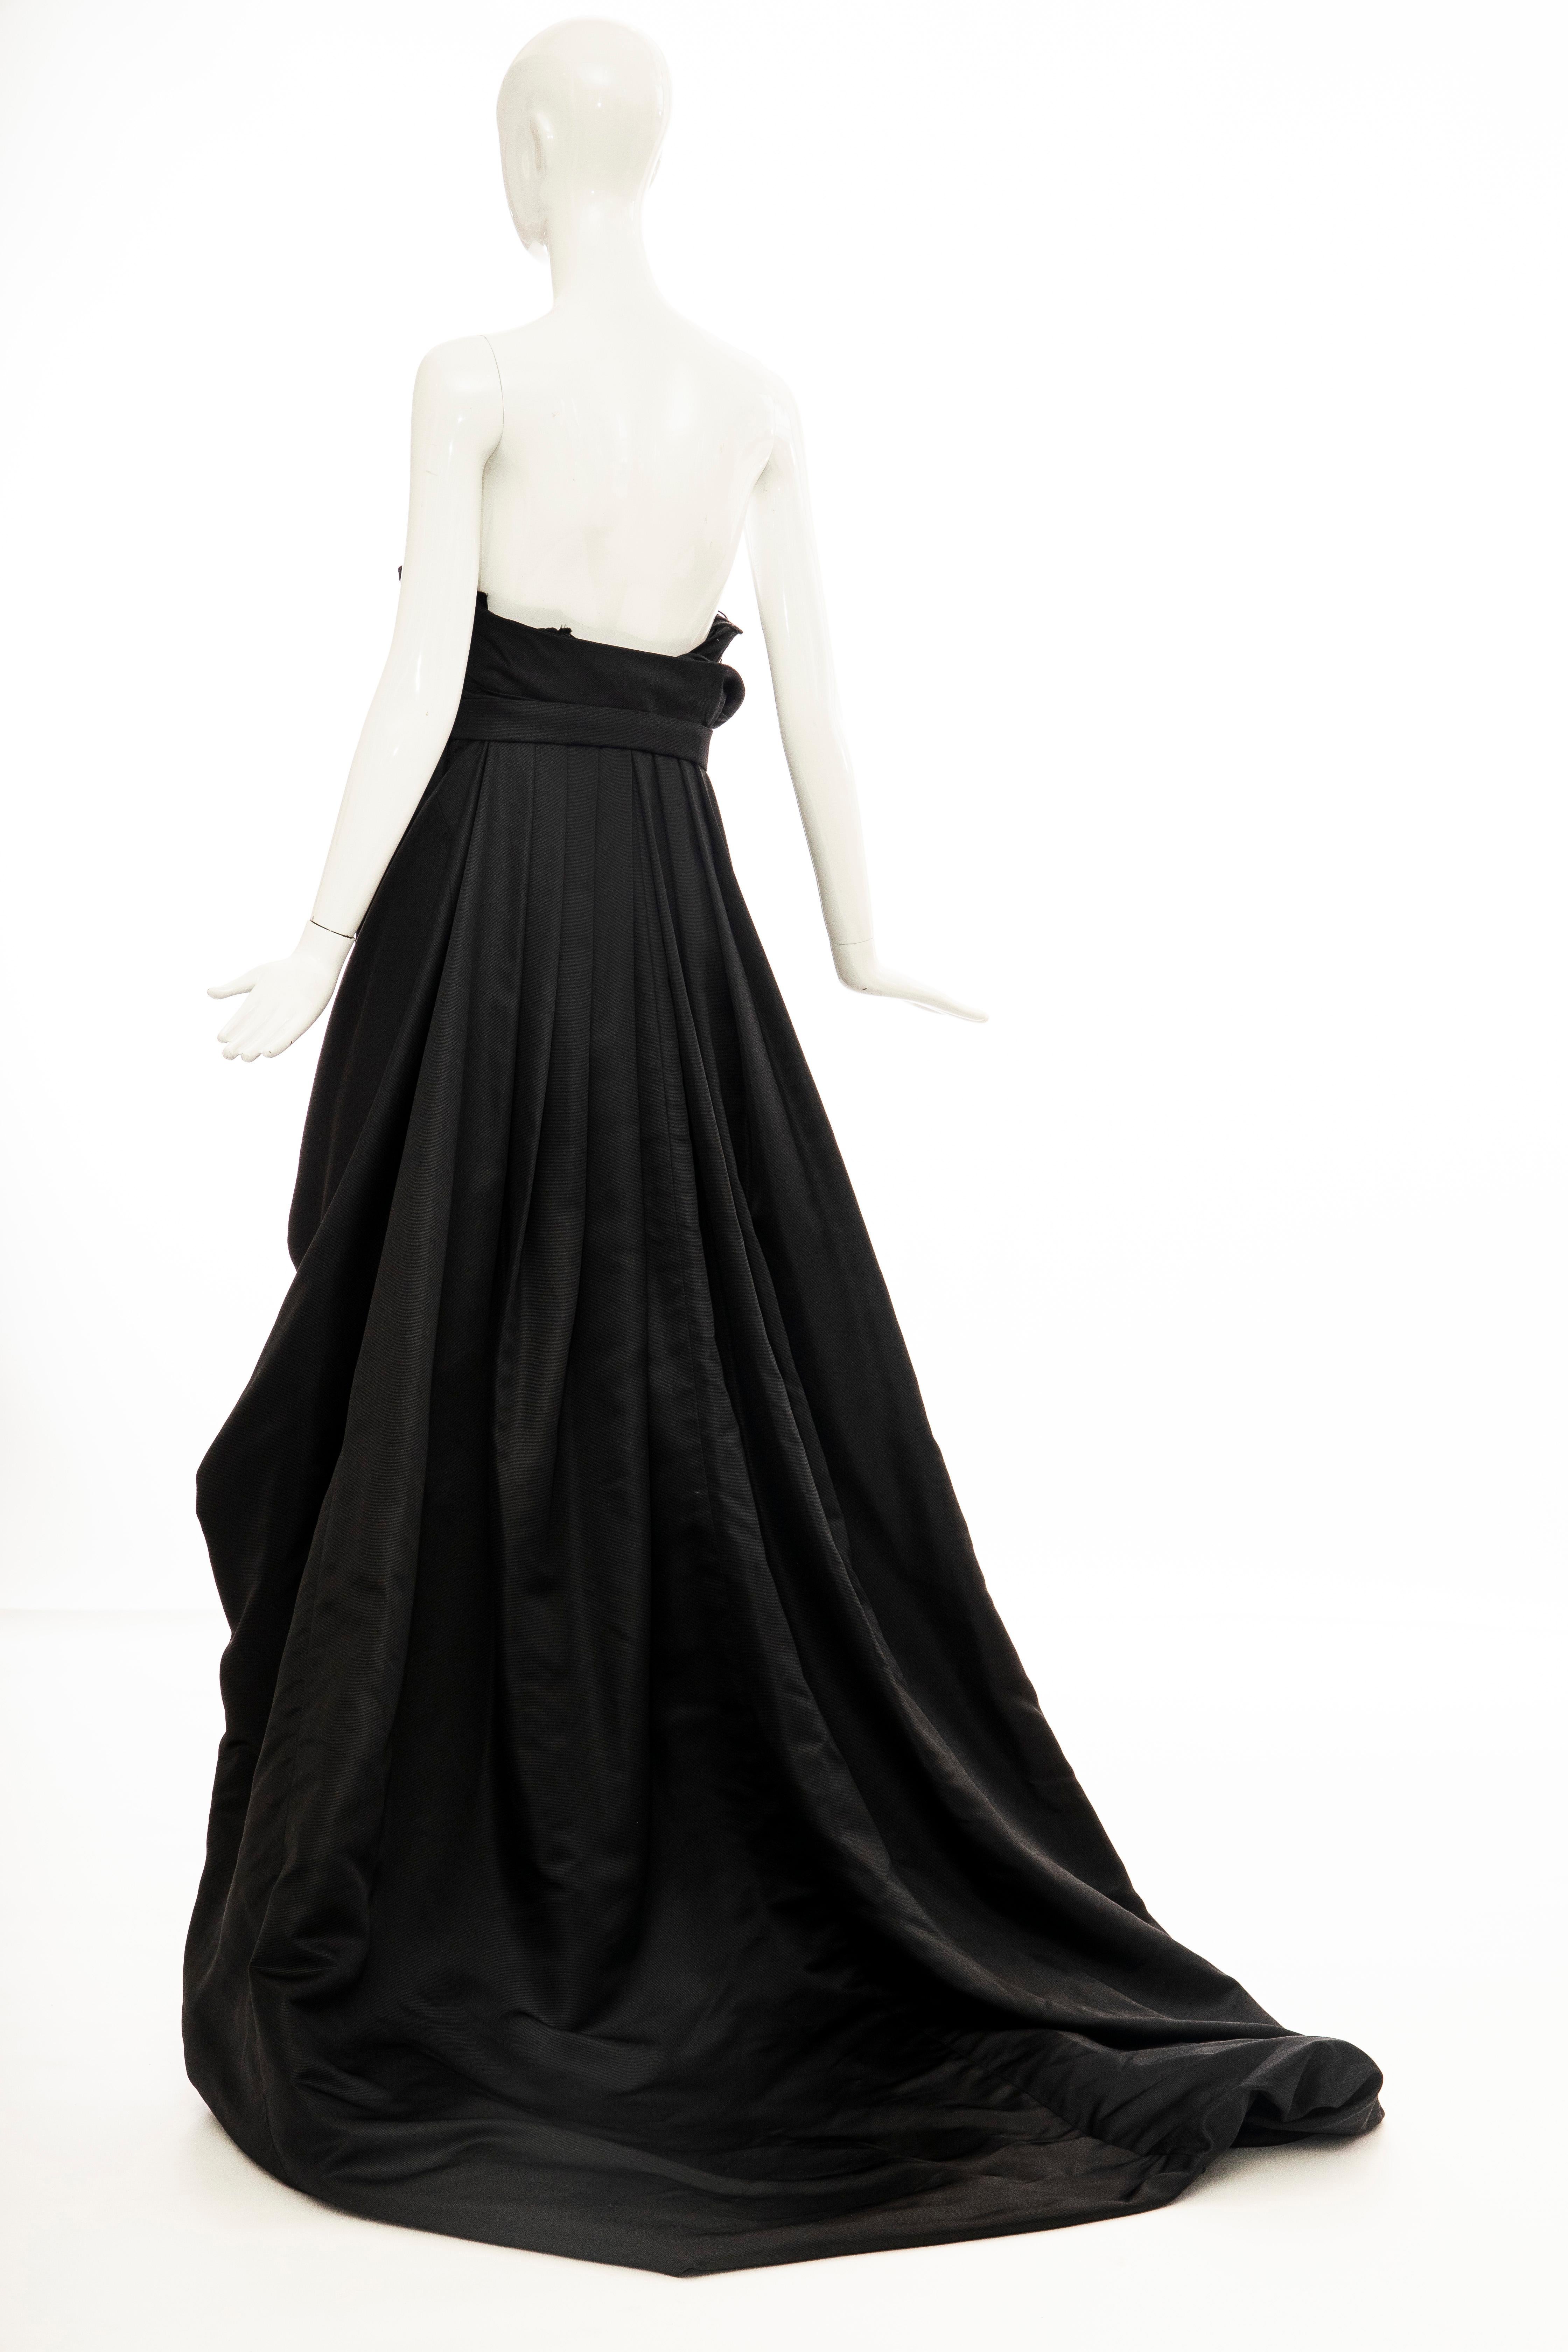 Christian Dior by John Galliano Black Silk Strapless Gown, Fall 2008 For Sale 6